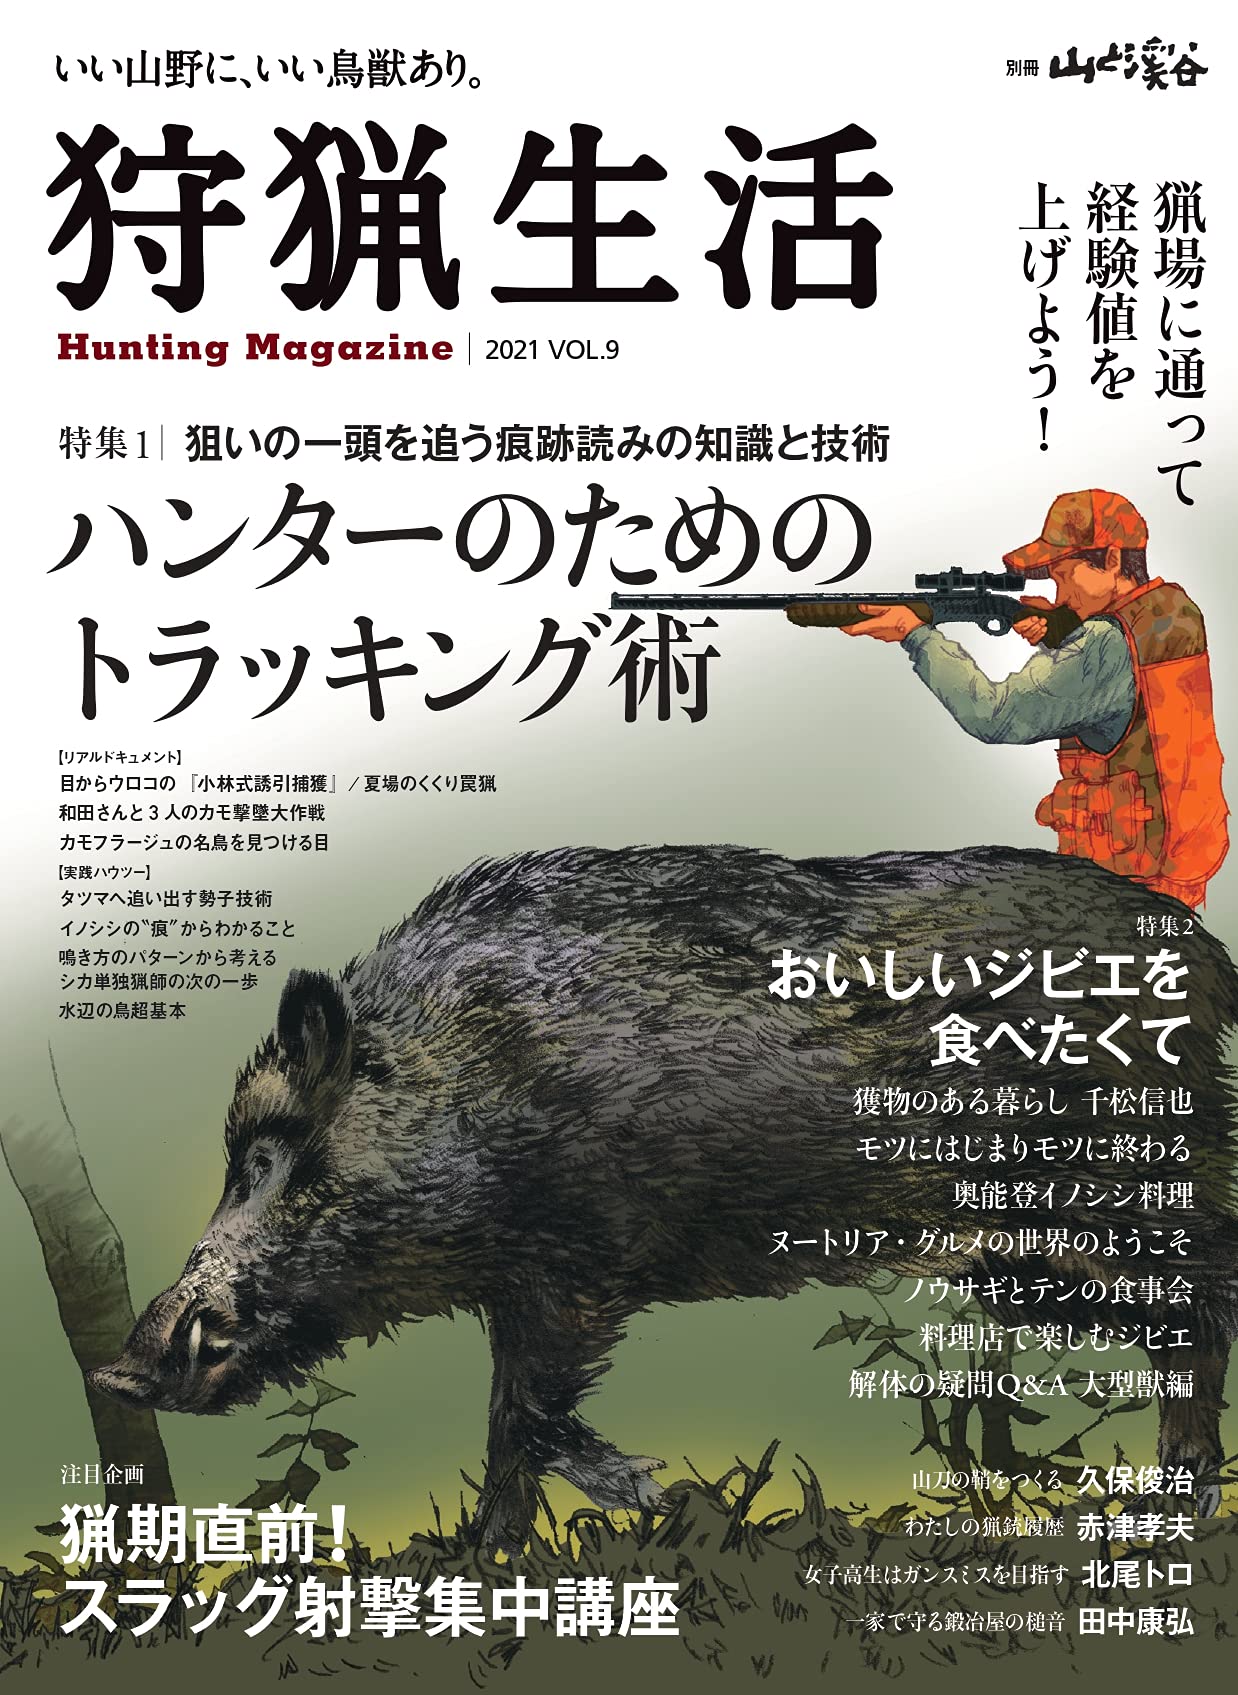 Hunting life 2021VOL.9 "Tracking technique for hunters"